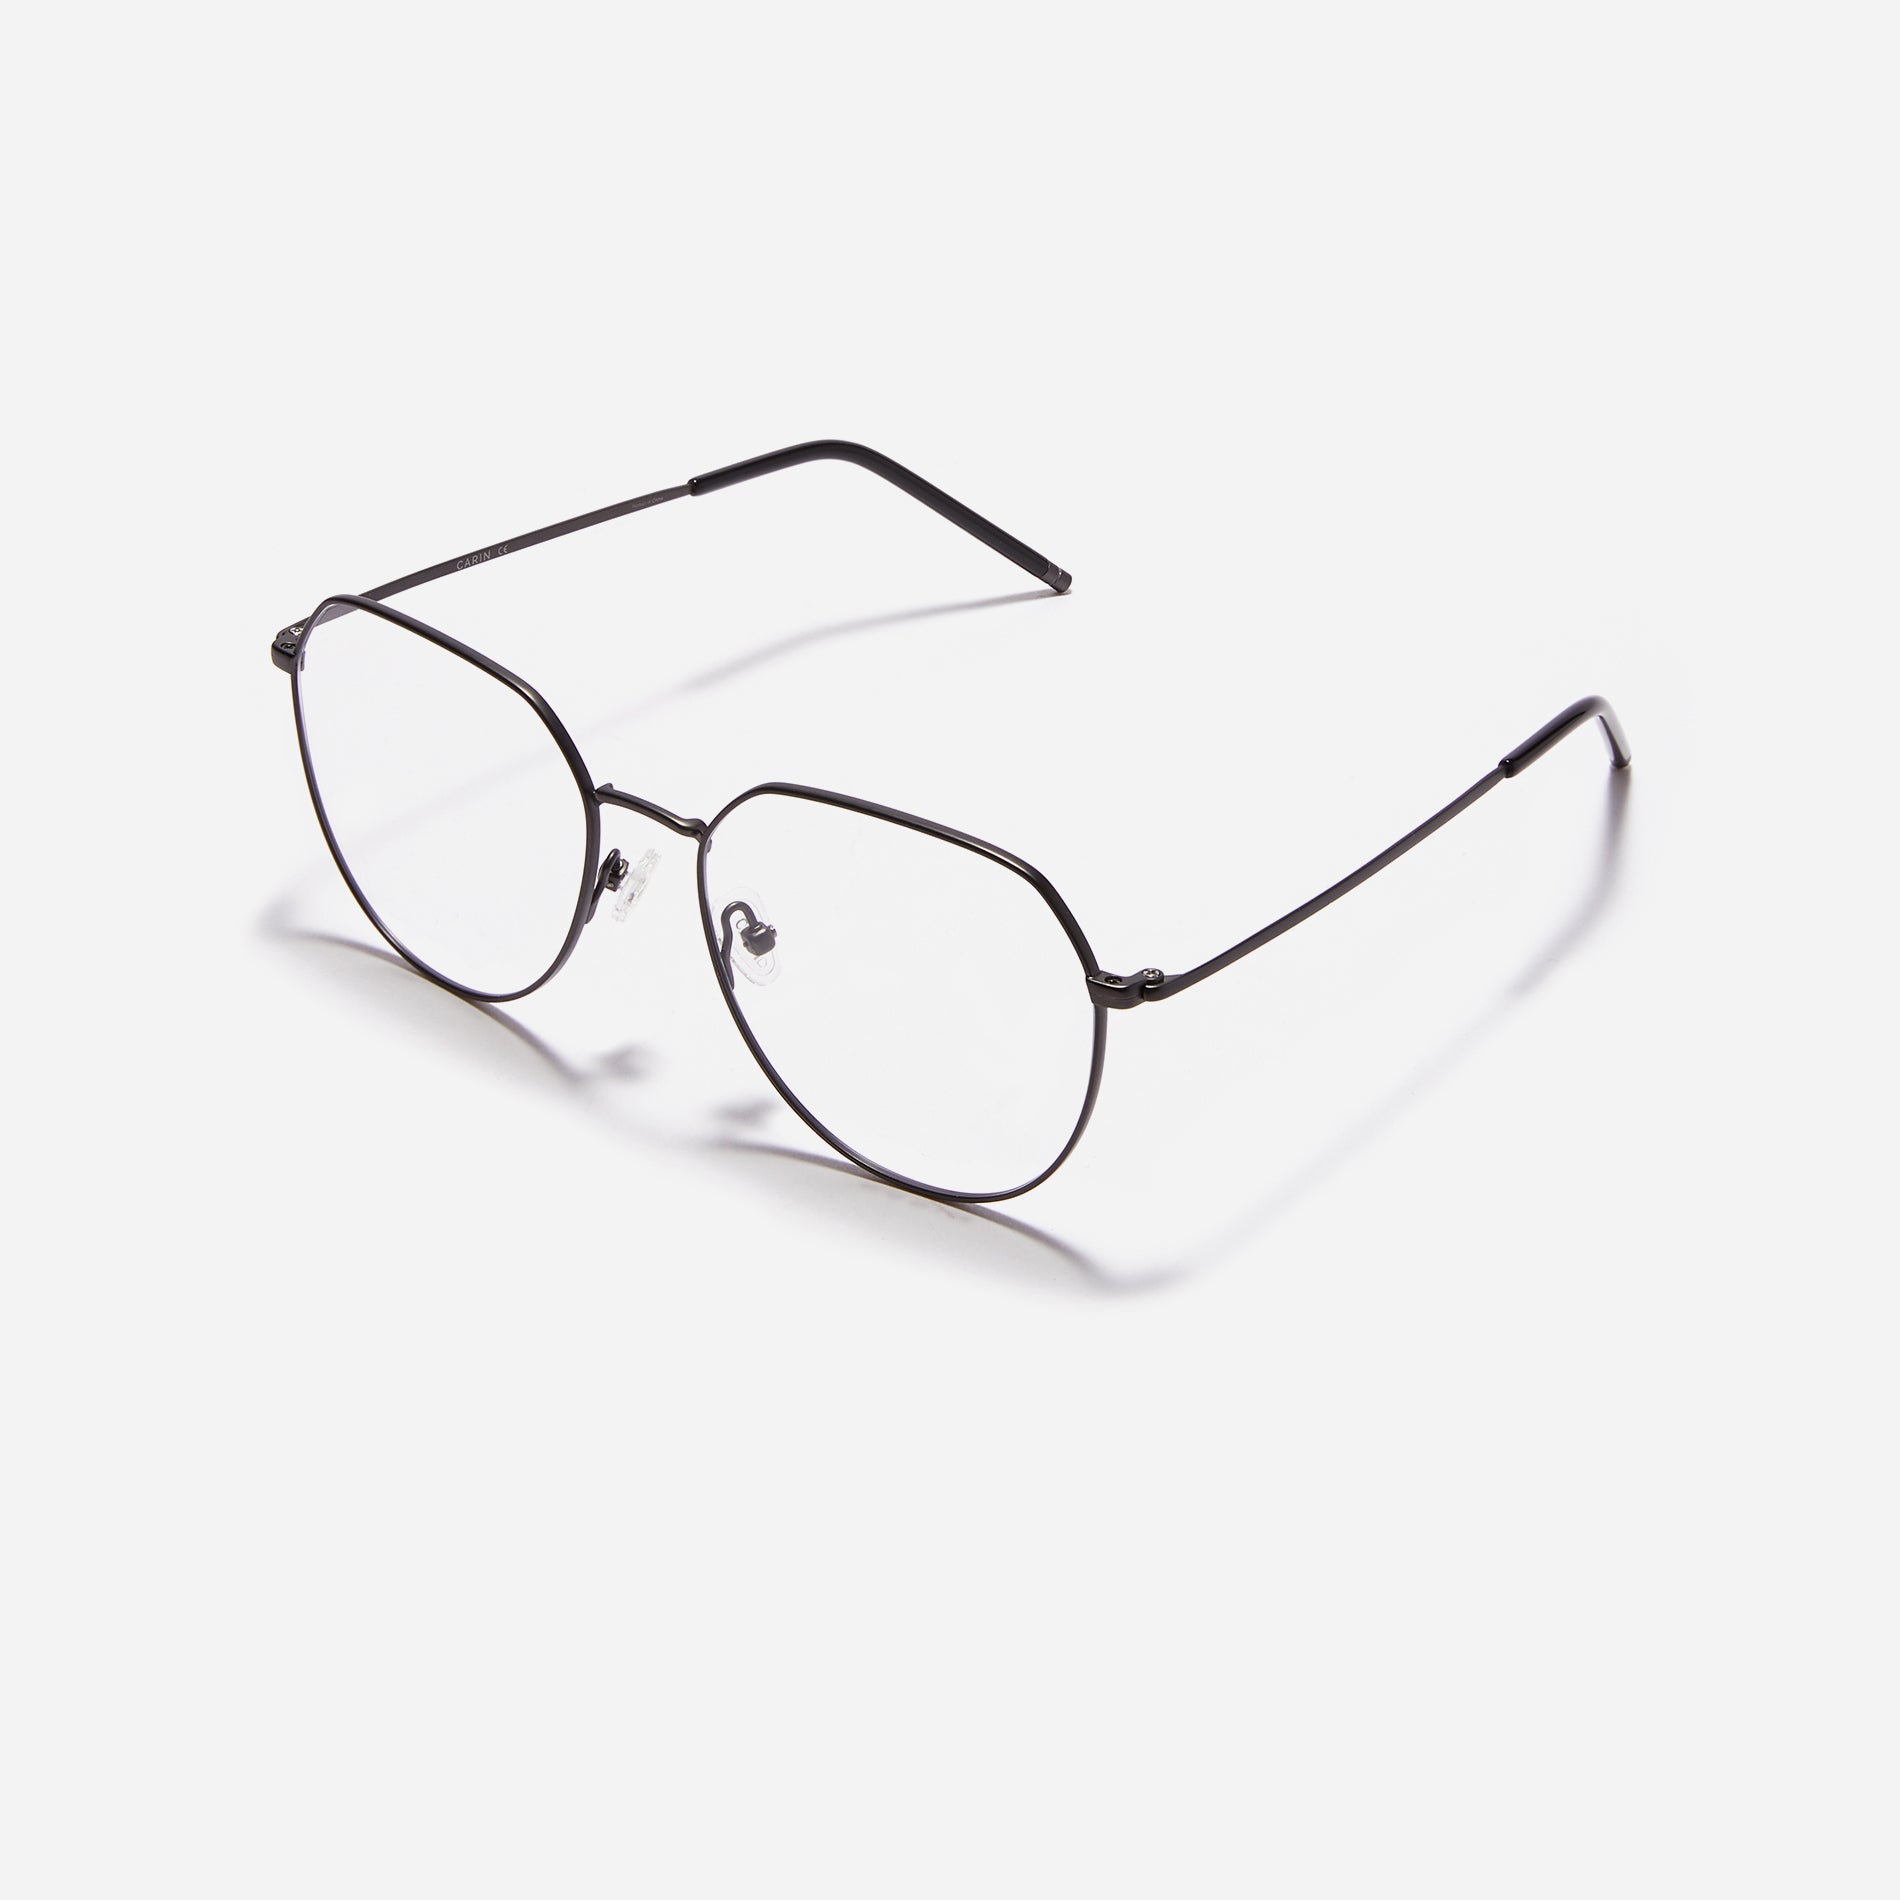 Boeing-style oversized eyeglasses crafted entirely from titanium for a lighter and more comfortable fit. With classic color options and frame design, these eyeglasses offer a retro style that effortlessly complements one's look.